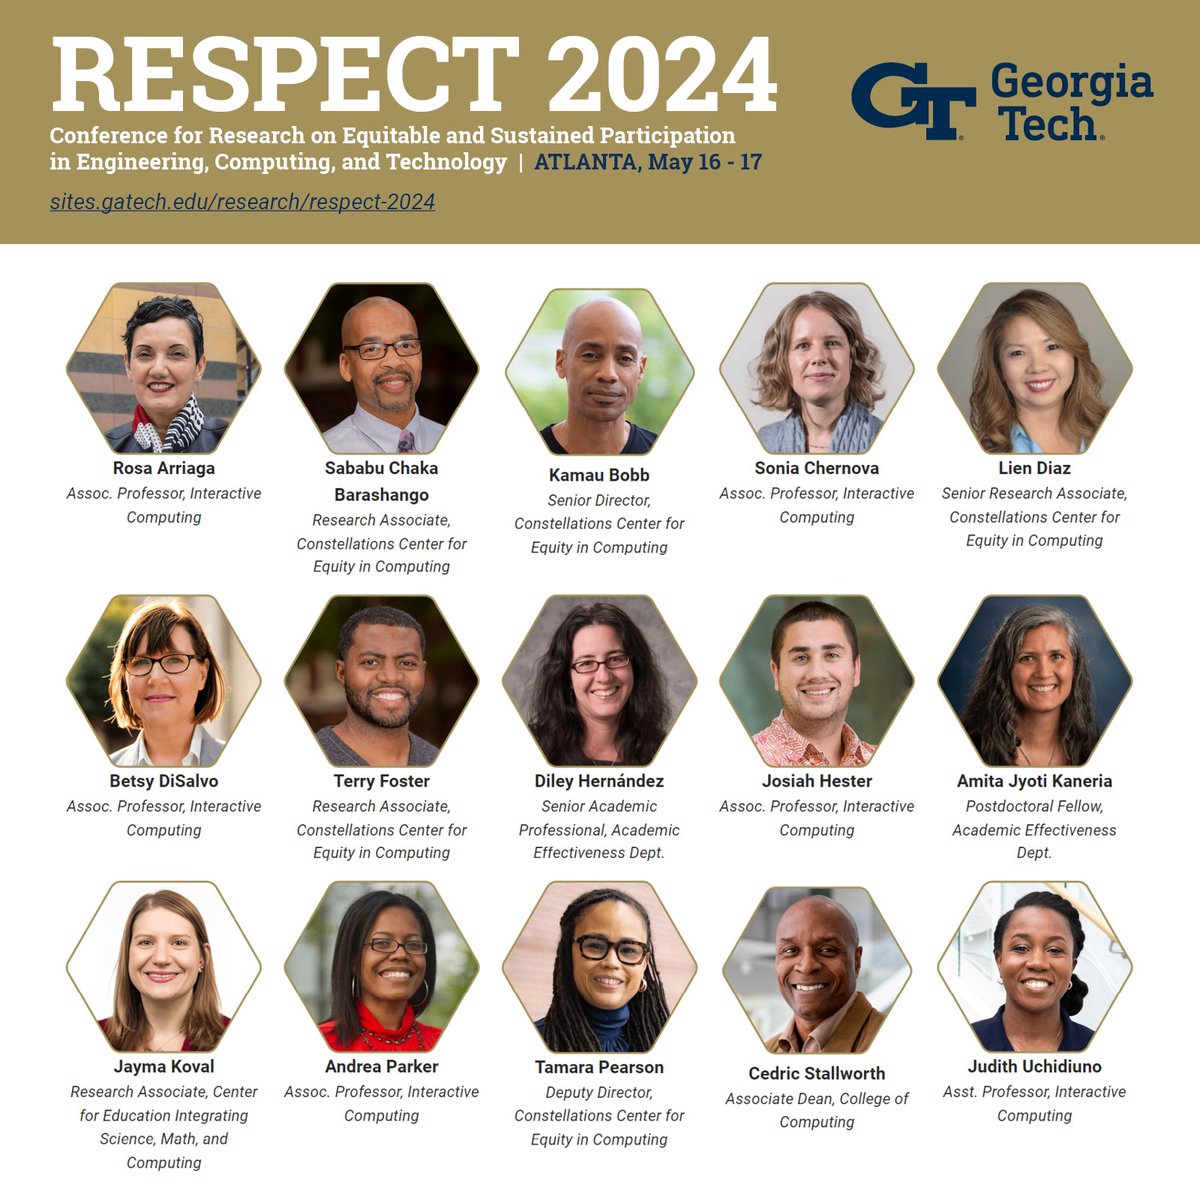 RESPECT, @TheOfficialACM Conference for Research on Equitable and Sustained Participation in Engineering, Computing, and Technology, comes to Atlanta, May 16-17. @GeorgiaTech will host 150+ experts from 26 U.S. states. Discover GT's faculty & more! sites.gatech.edu/research/respe…